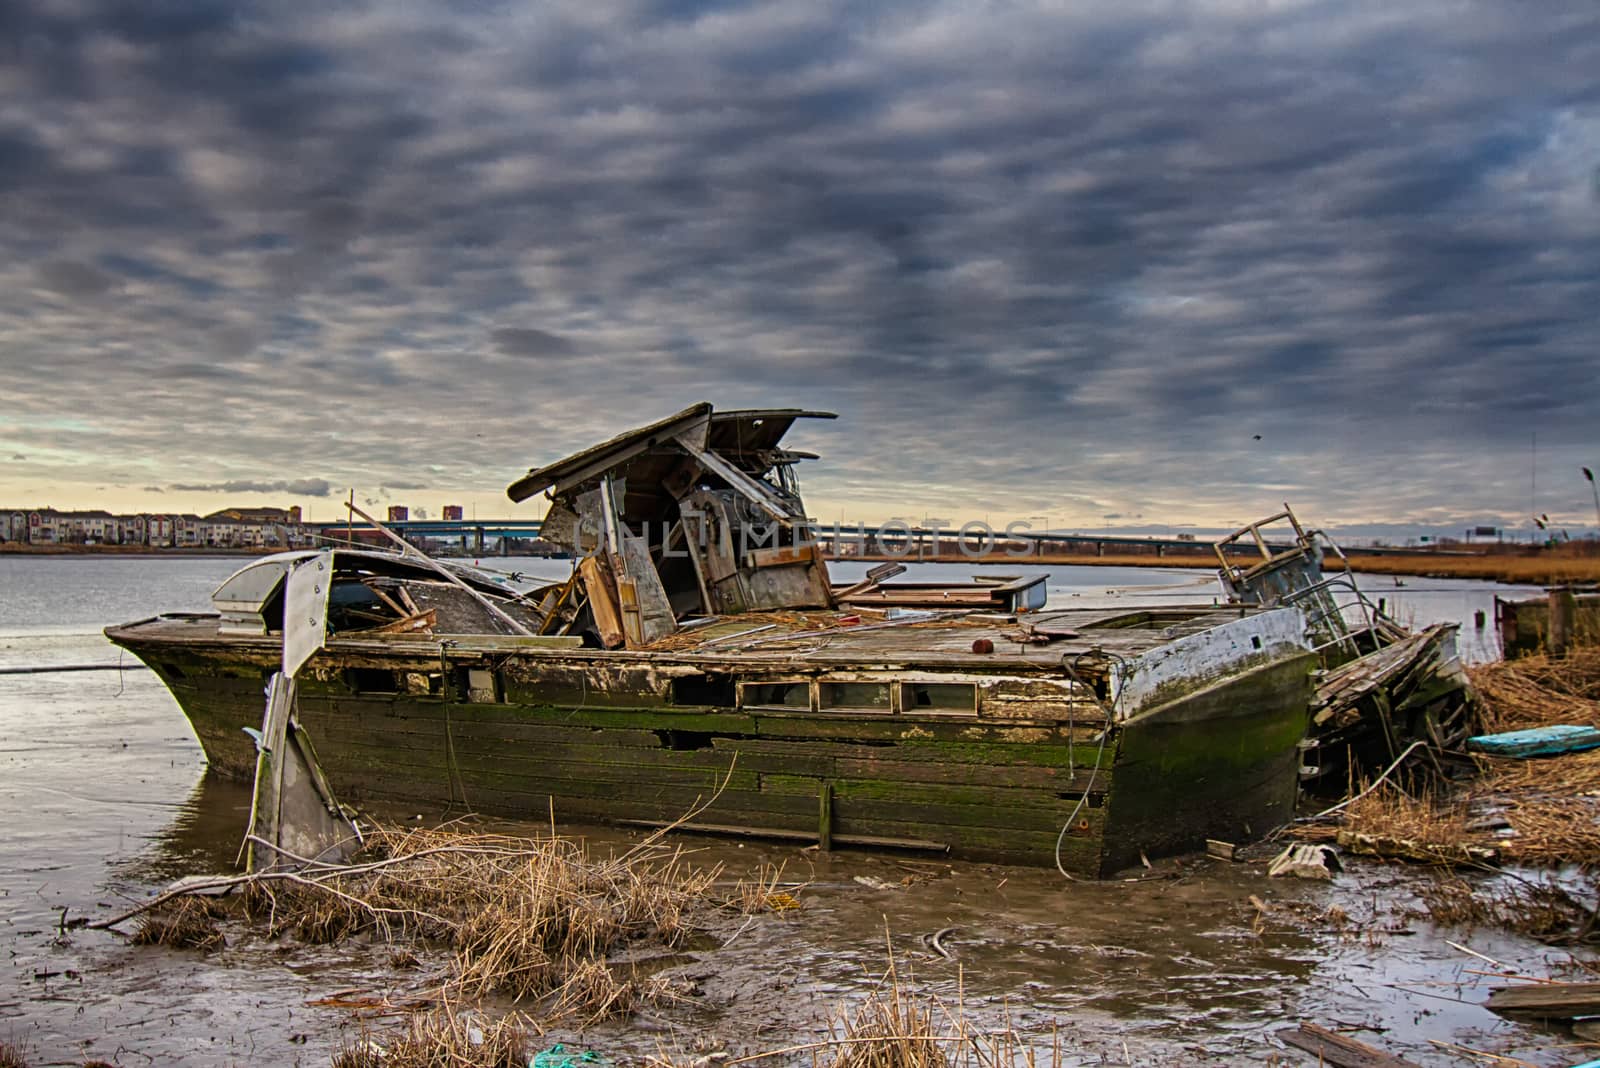 Abandoned boat by tedanddees